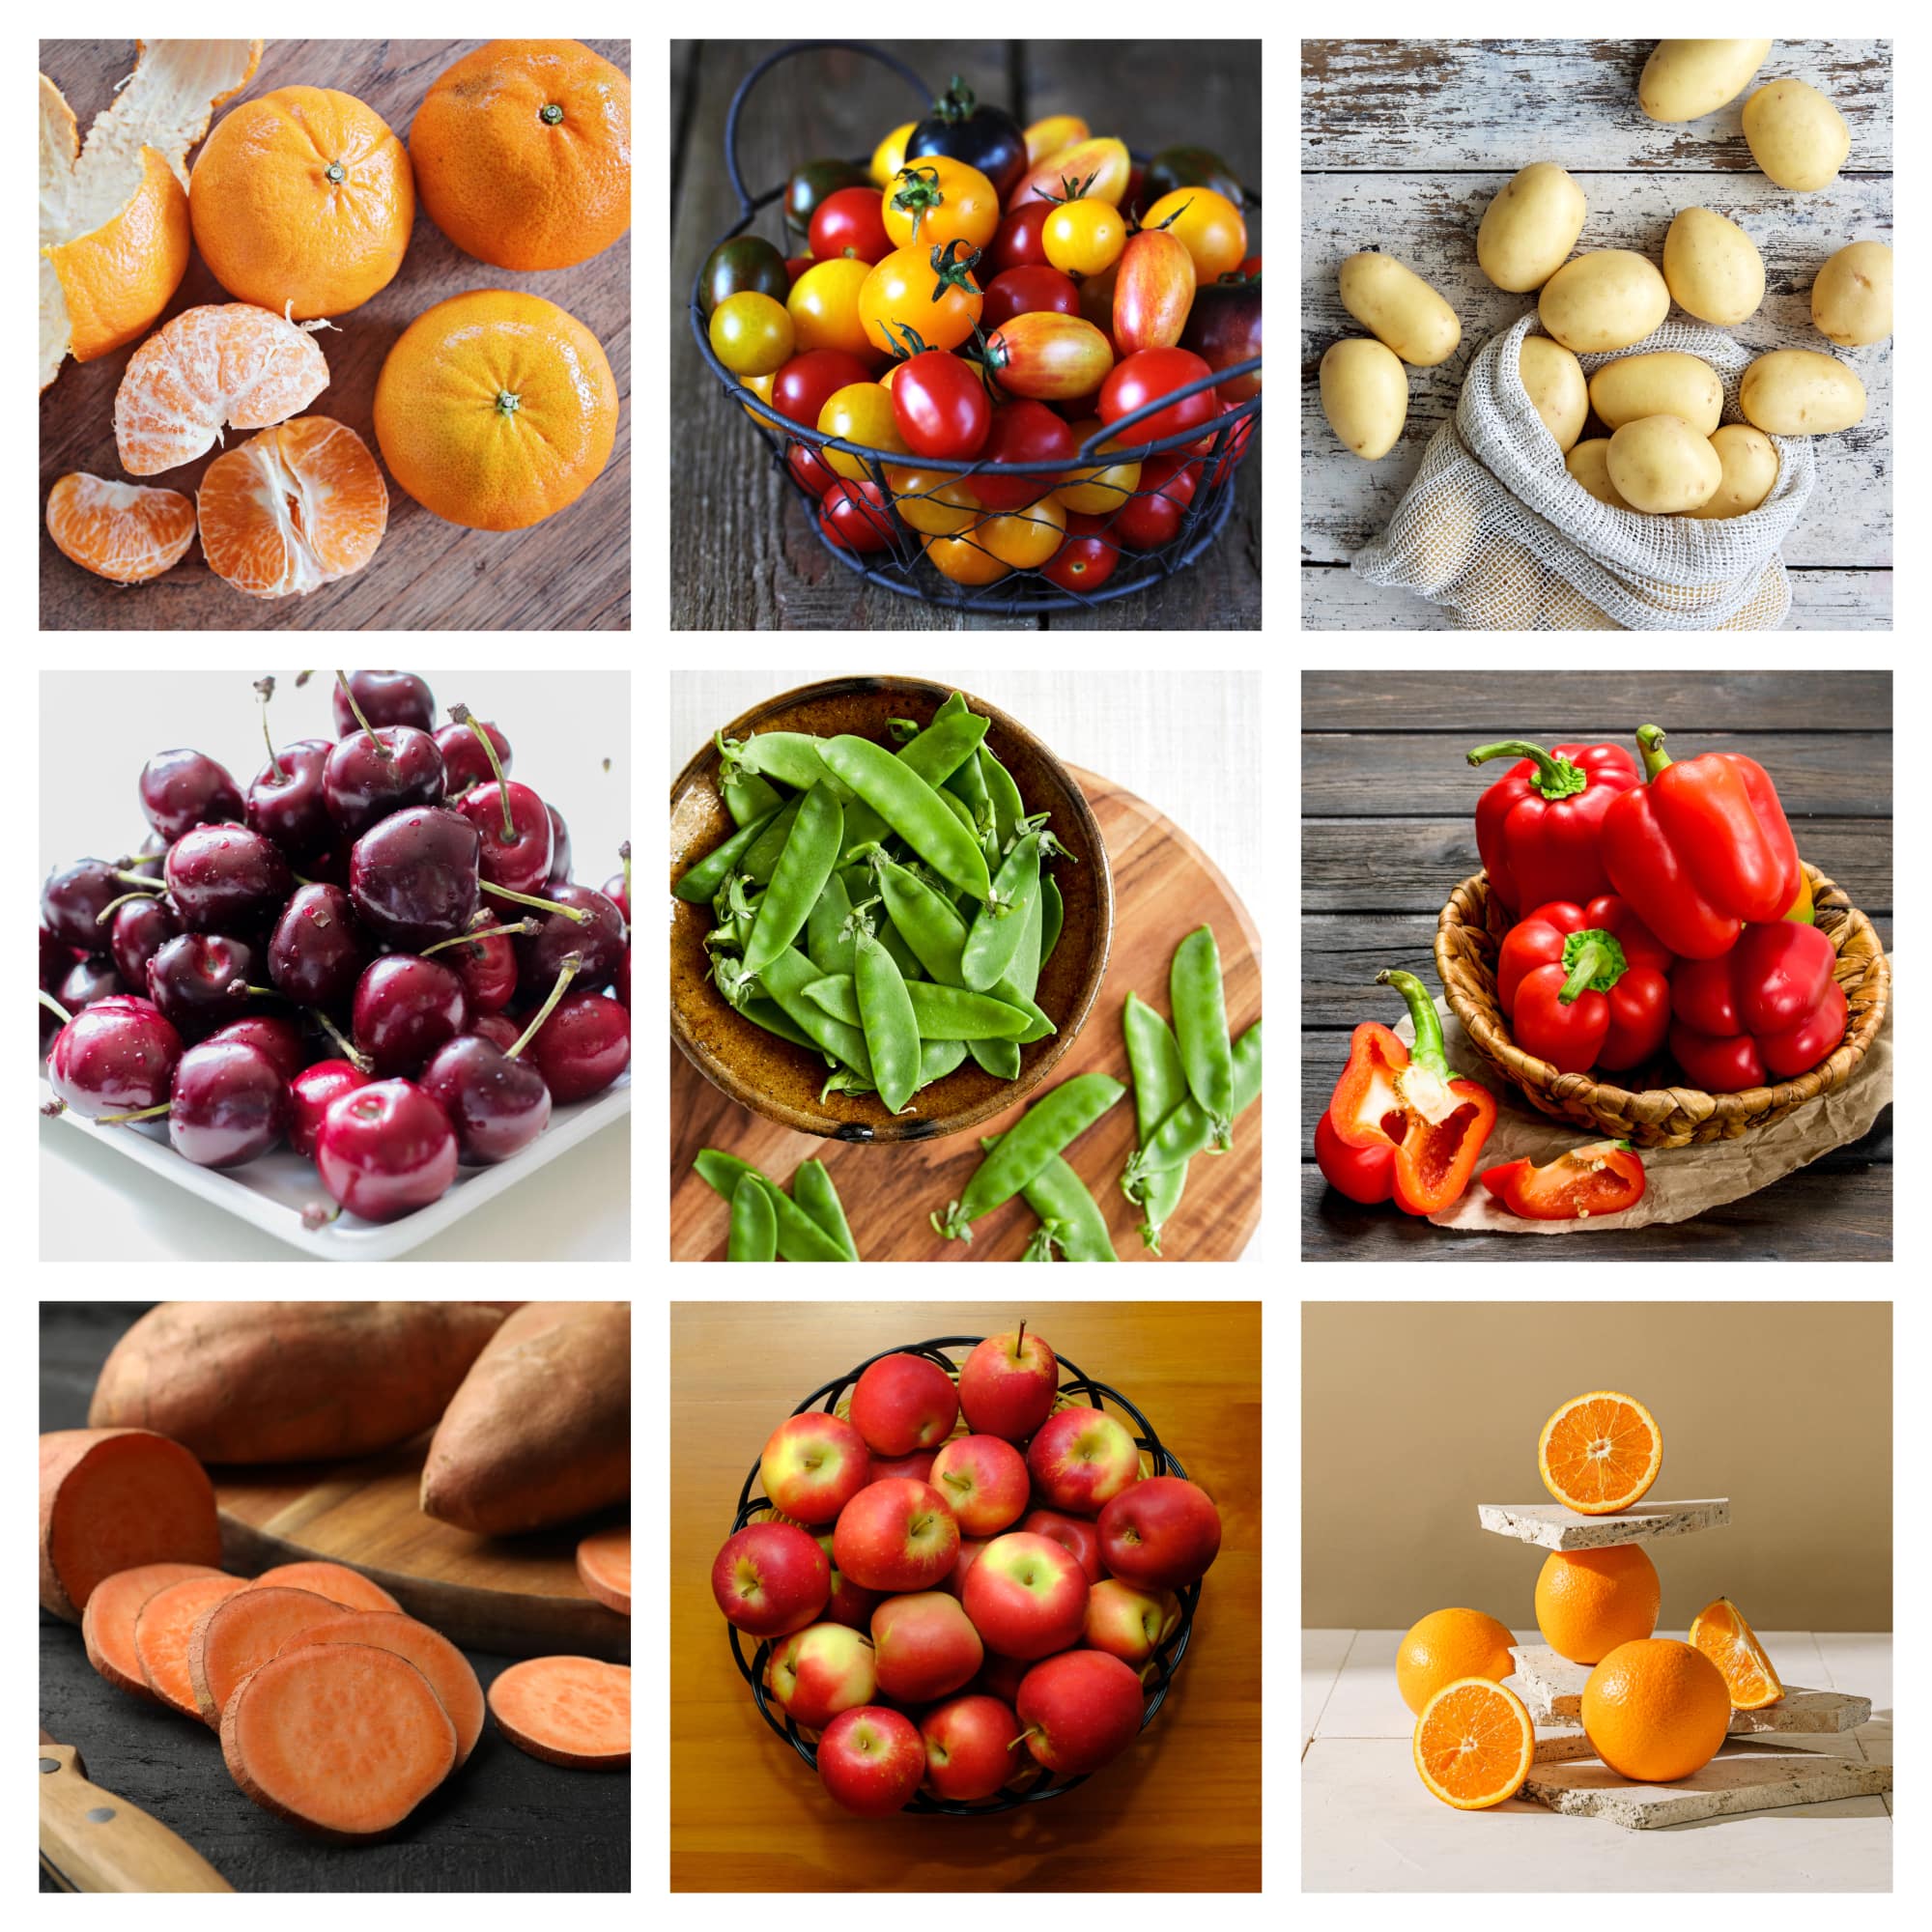 Dave's Market Update for 5 July 2023 includes Imperial mandarins, heirloom tomatoes, washed potatoes, USA cherries, snow peas, red capsicums, sweet potato, rockit apples, and oranges.